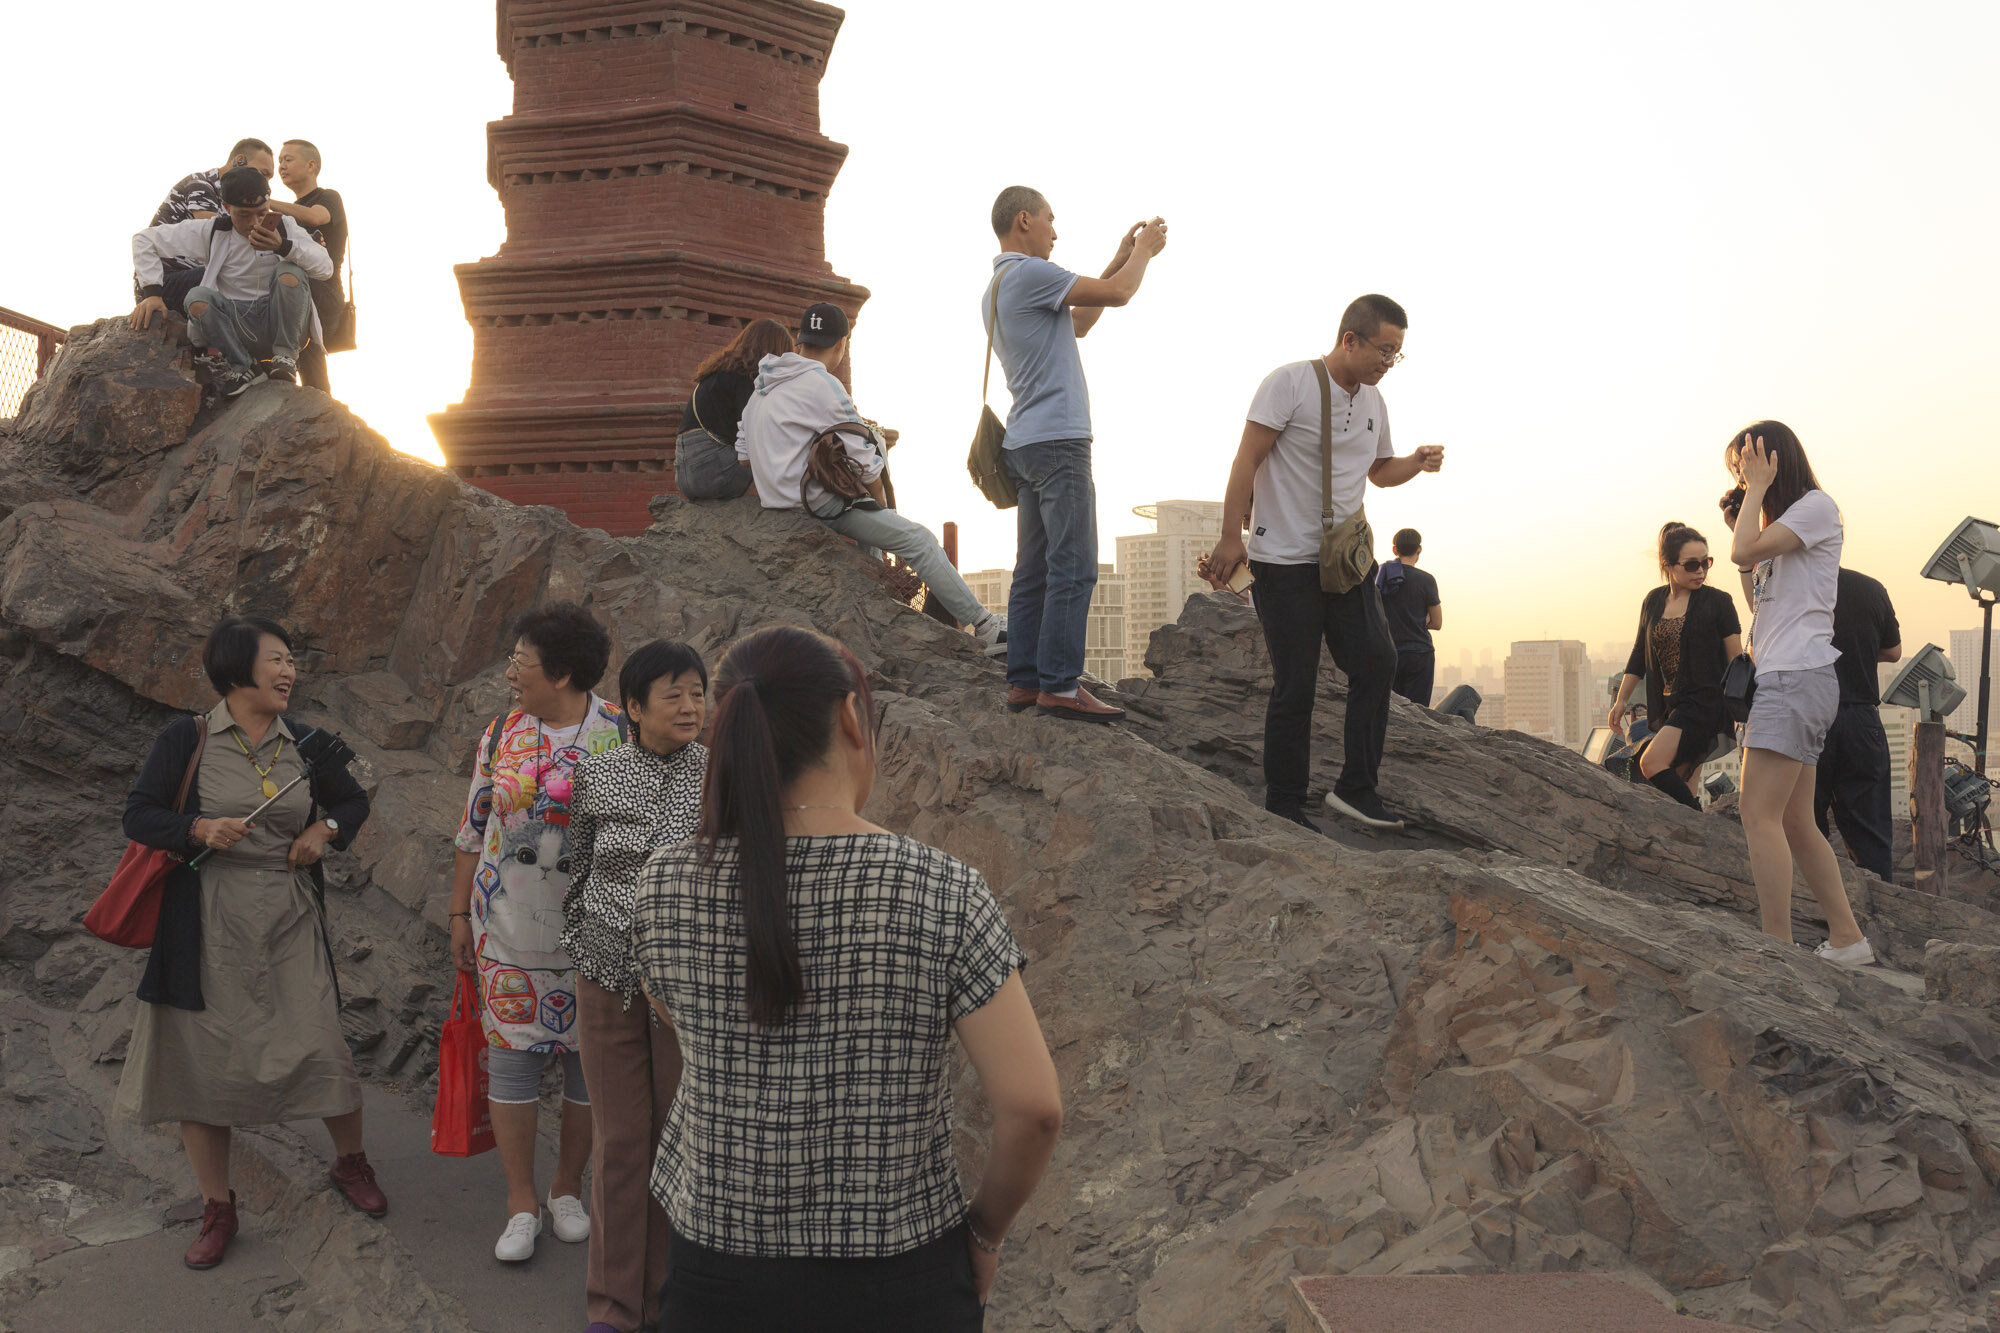  September 24th 2019. Xinjiang province, China. Han Chinese and Uiguur tourists and locals enjoying the views from the heights of Hongshan park in the provincial capital Urumqi. 